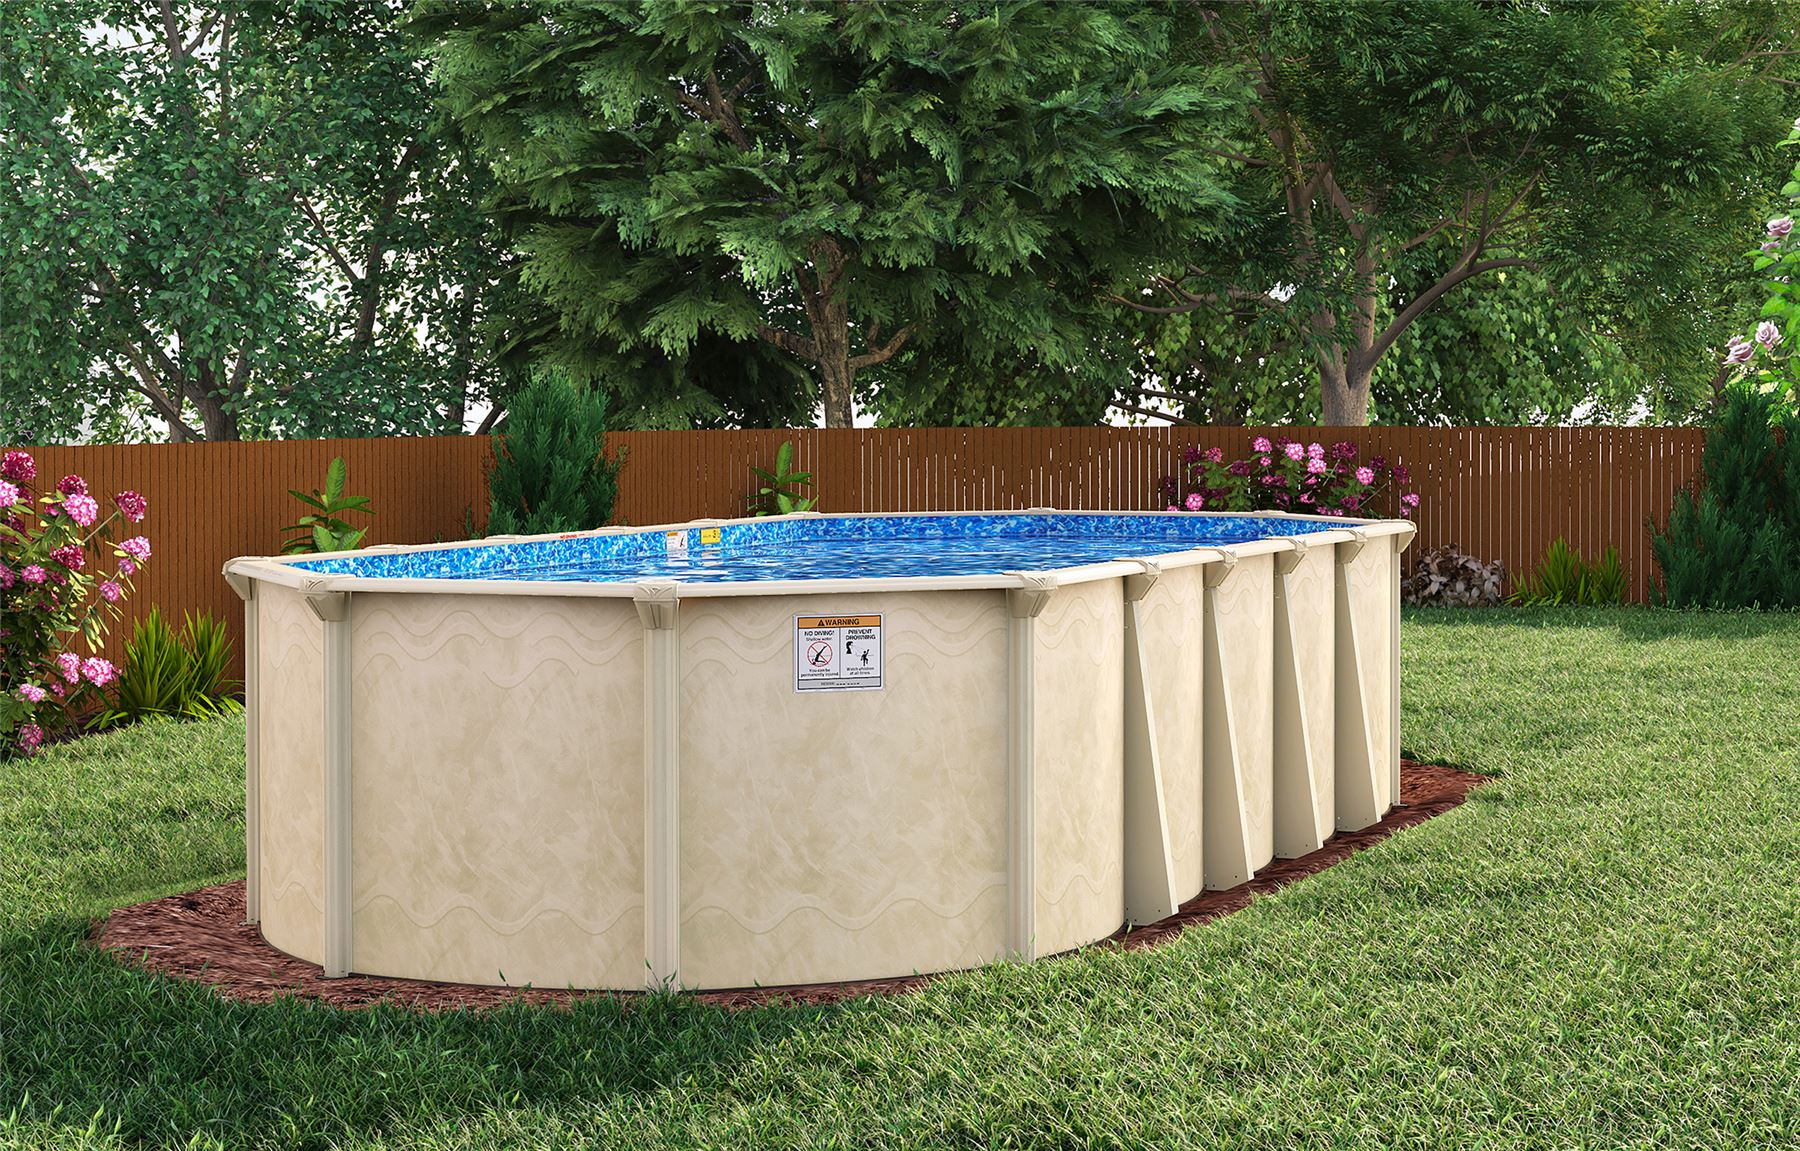 Embassy 20' x 12' Sunnylea Oval Above Ground Pool with 52" Wall